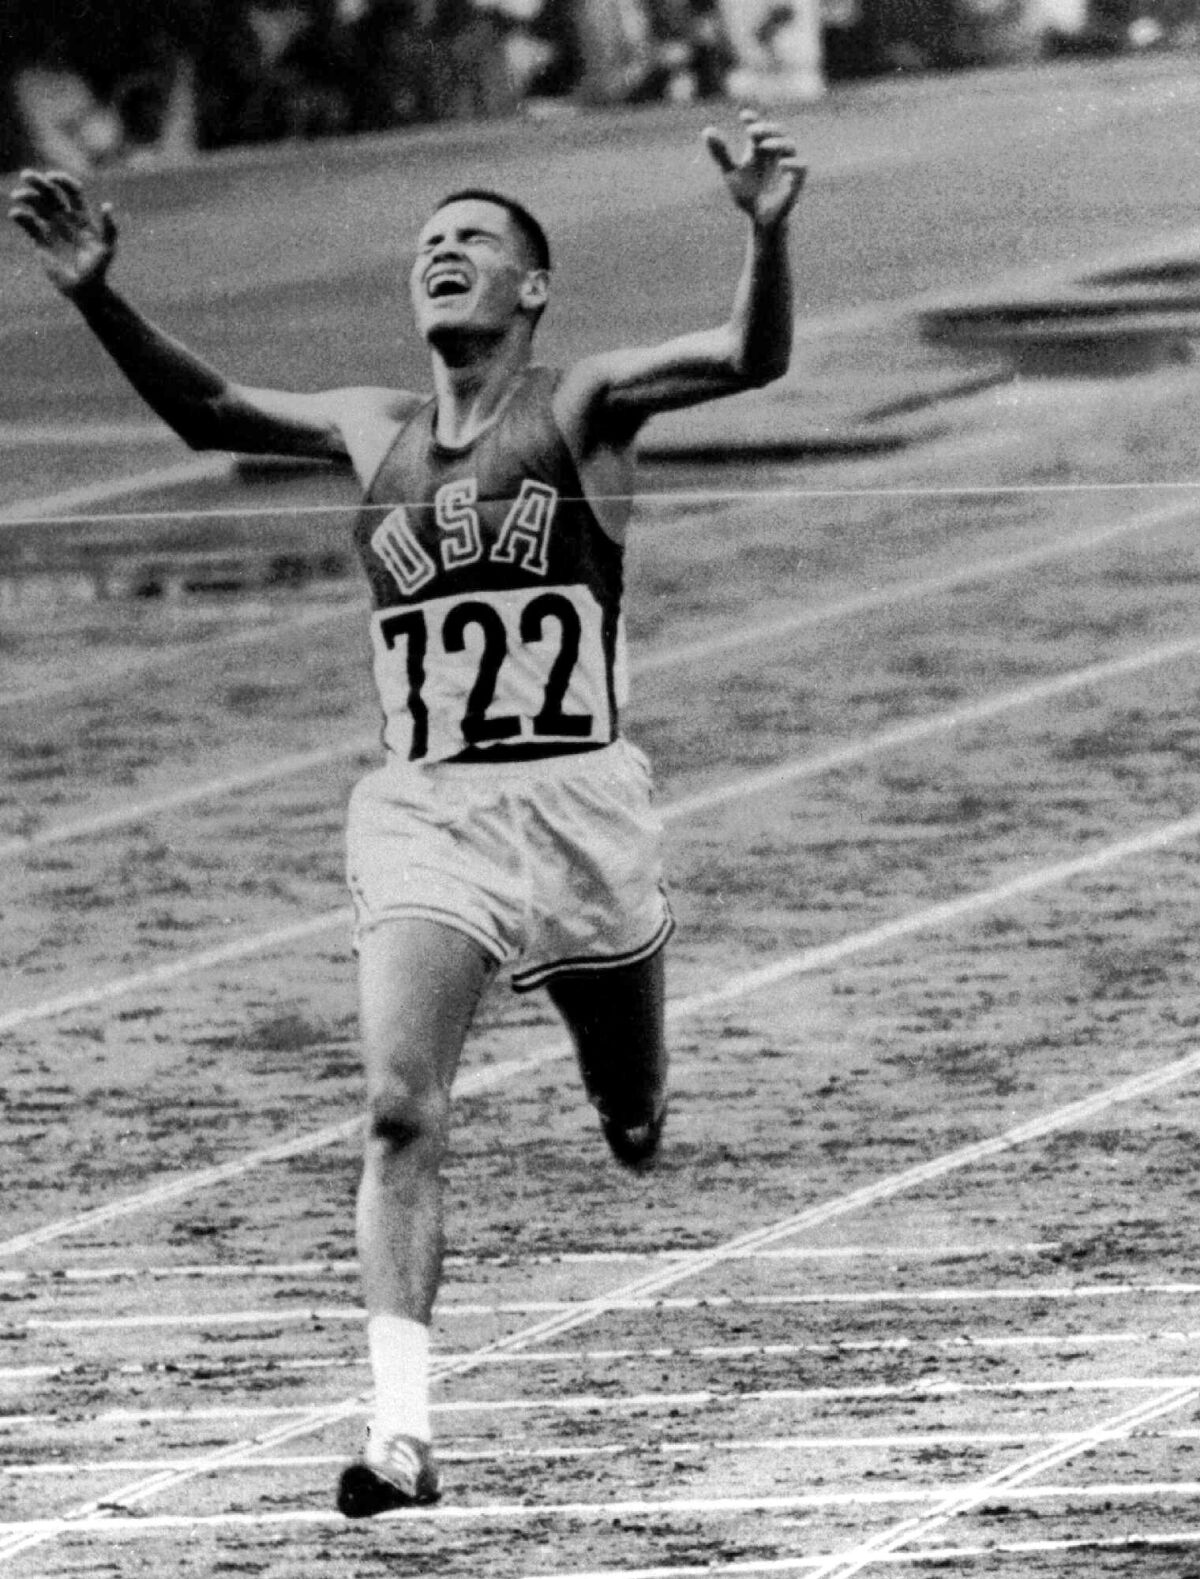 FILE - In this Oct. 14, 1964, file photo, U.S. Marine Lt. Billy Mills pulls off a stunning upset by winning the 10,000 meters Olympic race in Tokyo. Mills set an Olympic record 0f 28:24:4, and was the only American ever to win the event. (AP Photo/File)